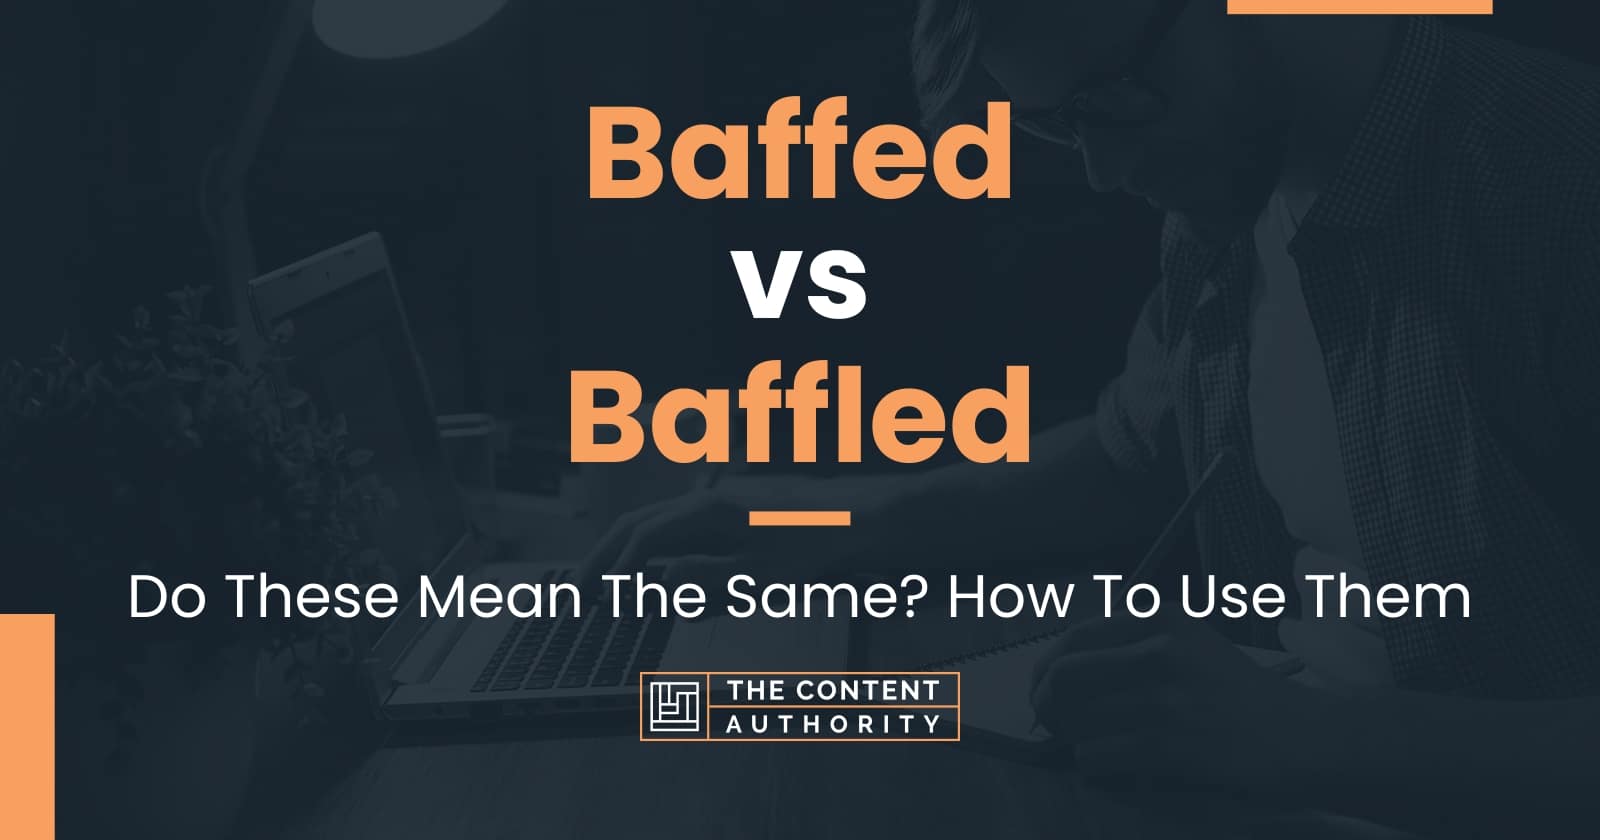 Baffed vs Baffled: Do These Mean The Same? How To Use Them